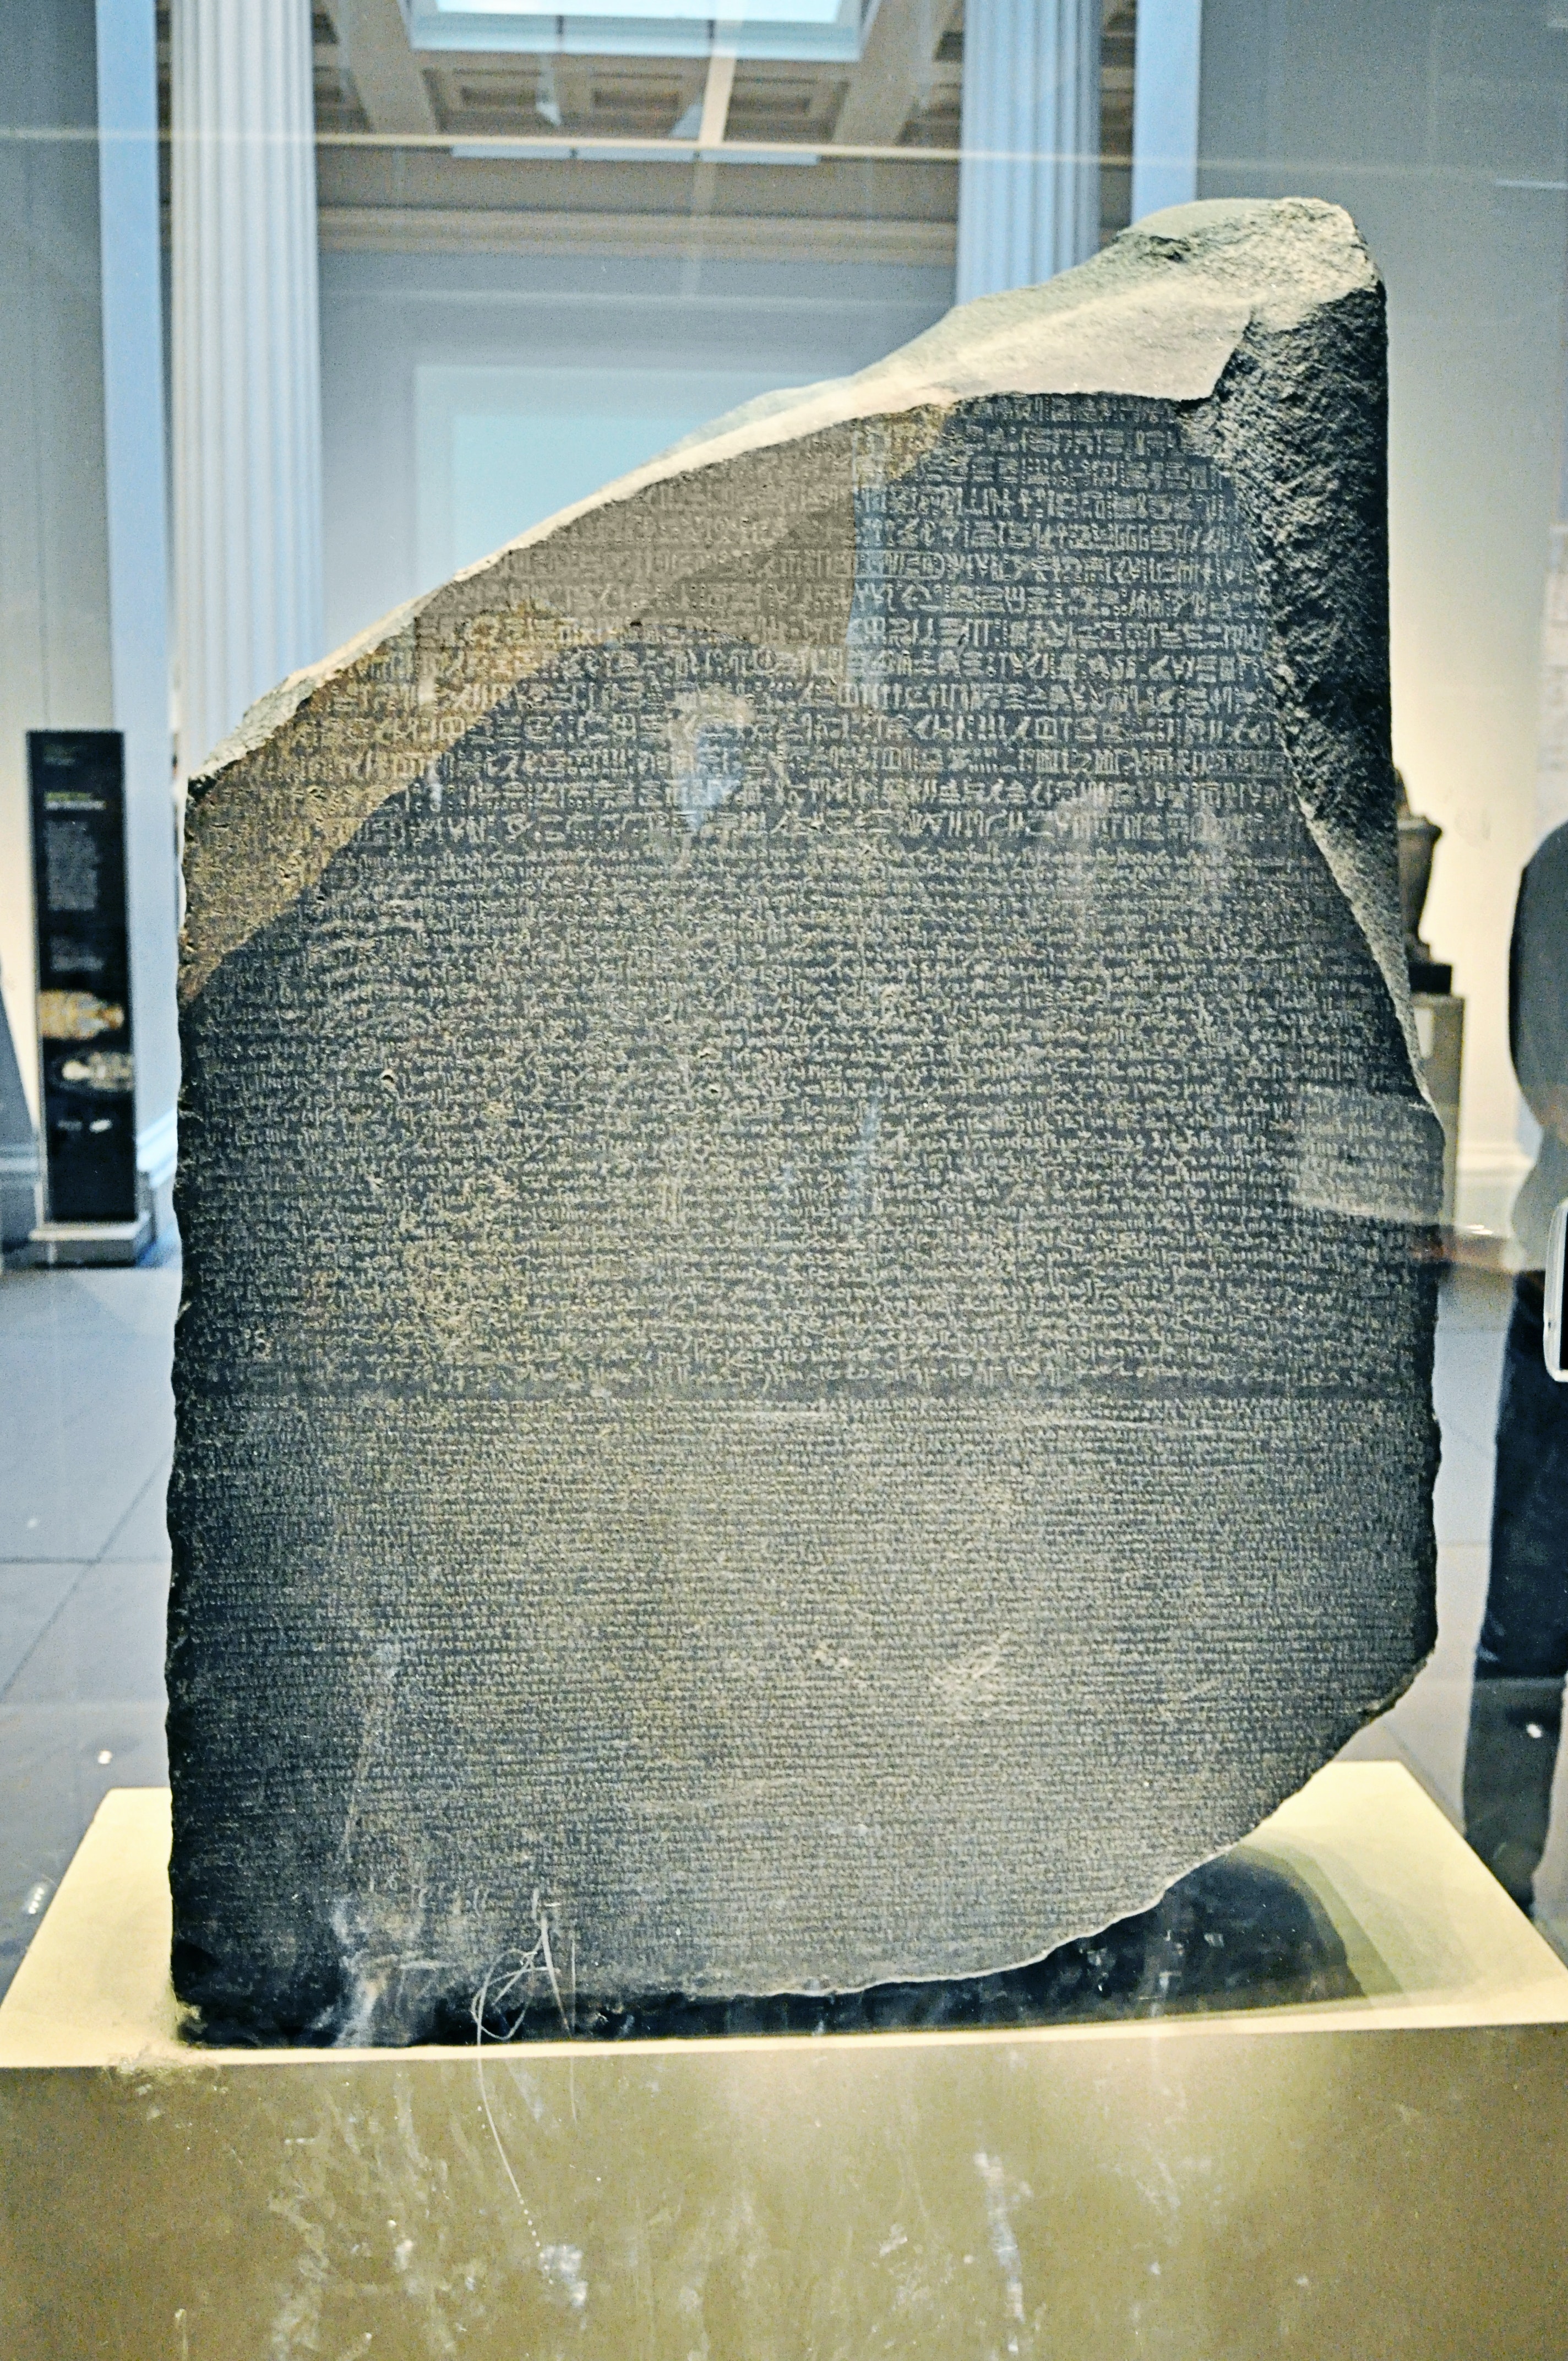 The Rosetta Stone, a slab of stone covered in small inscriptions, stands behind glass casing. The top of the stone is jagged and diagonal where the rest of the tablet has been lost.